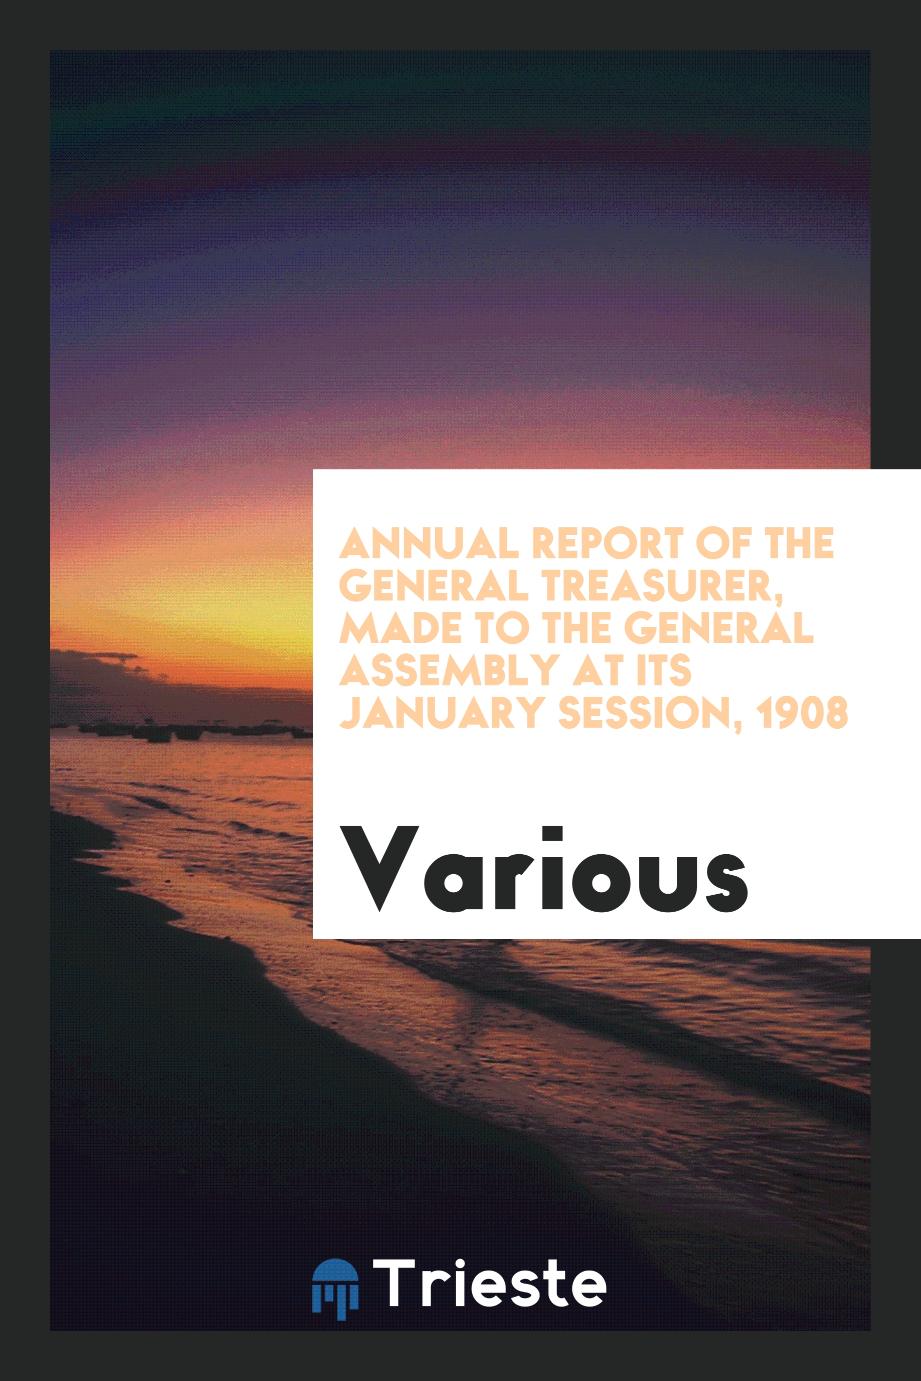 Annual Report of the General Treasurer, Made to the General Assembly at Its January Session, 1908